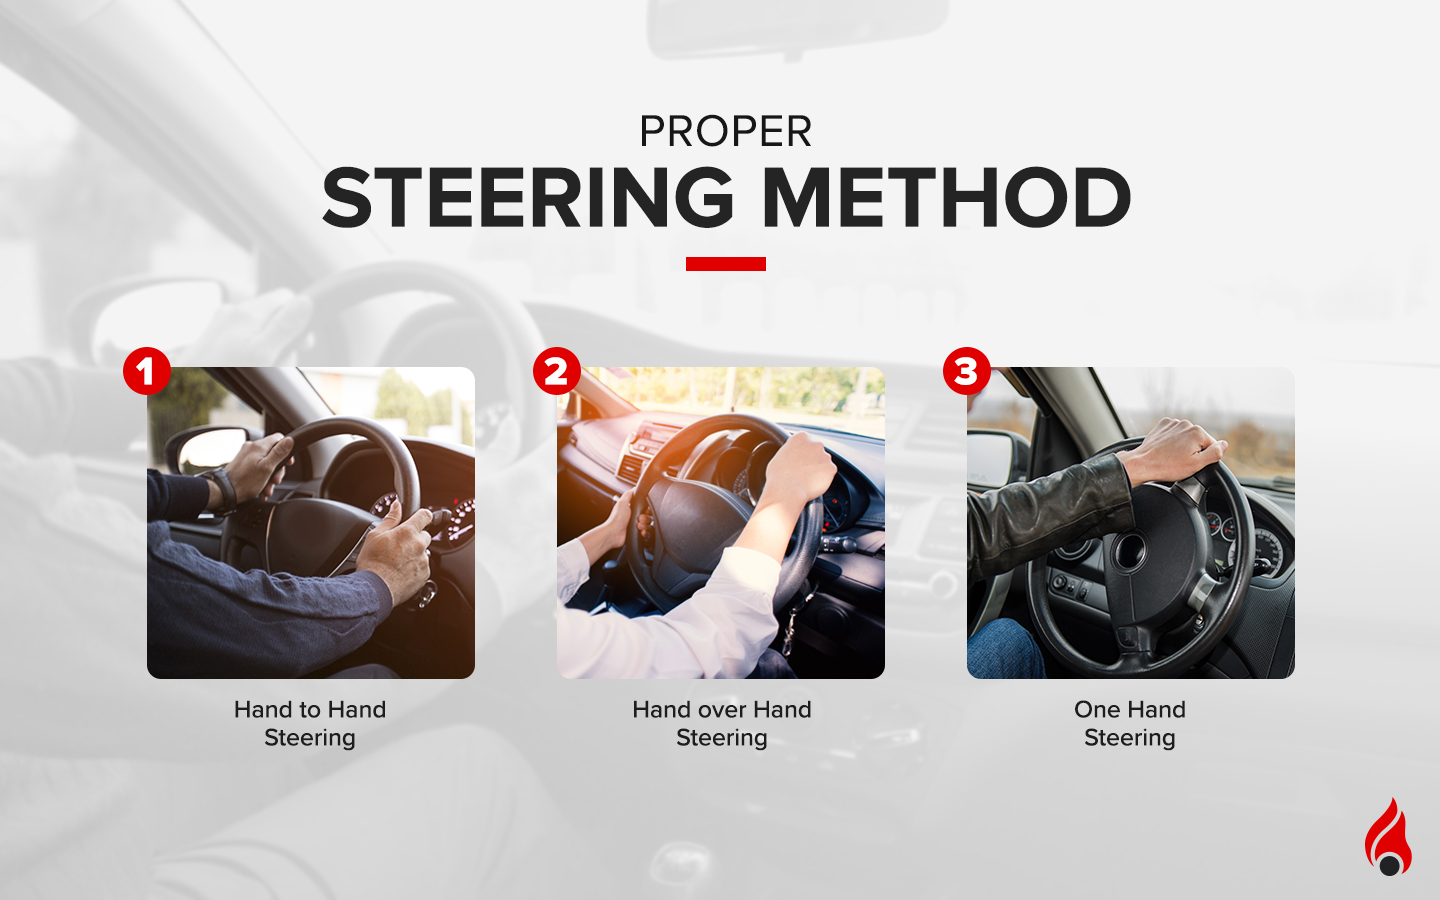 Steering wheel techniques used globally